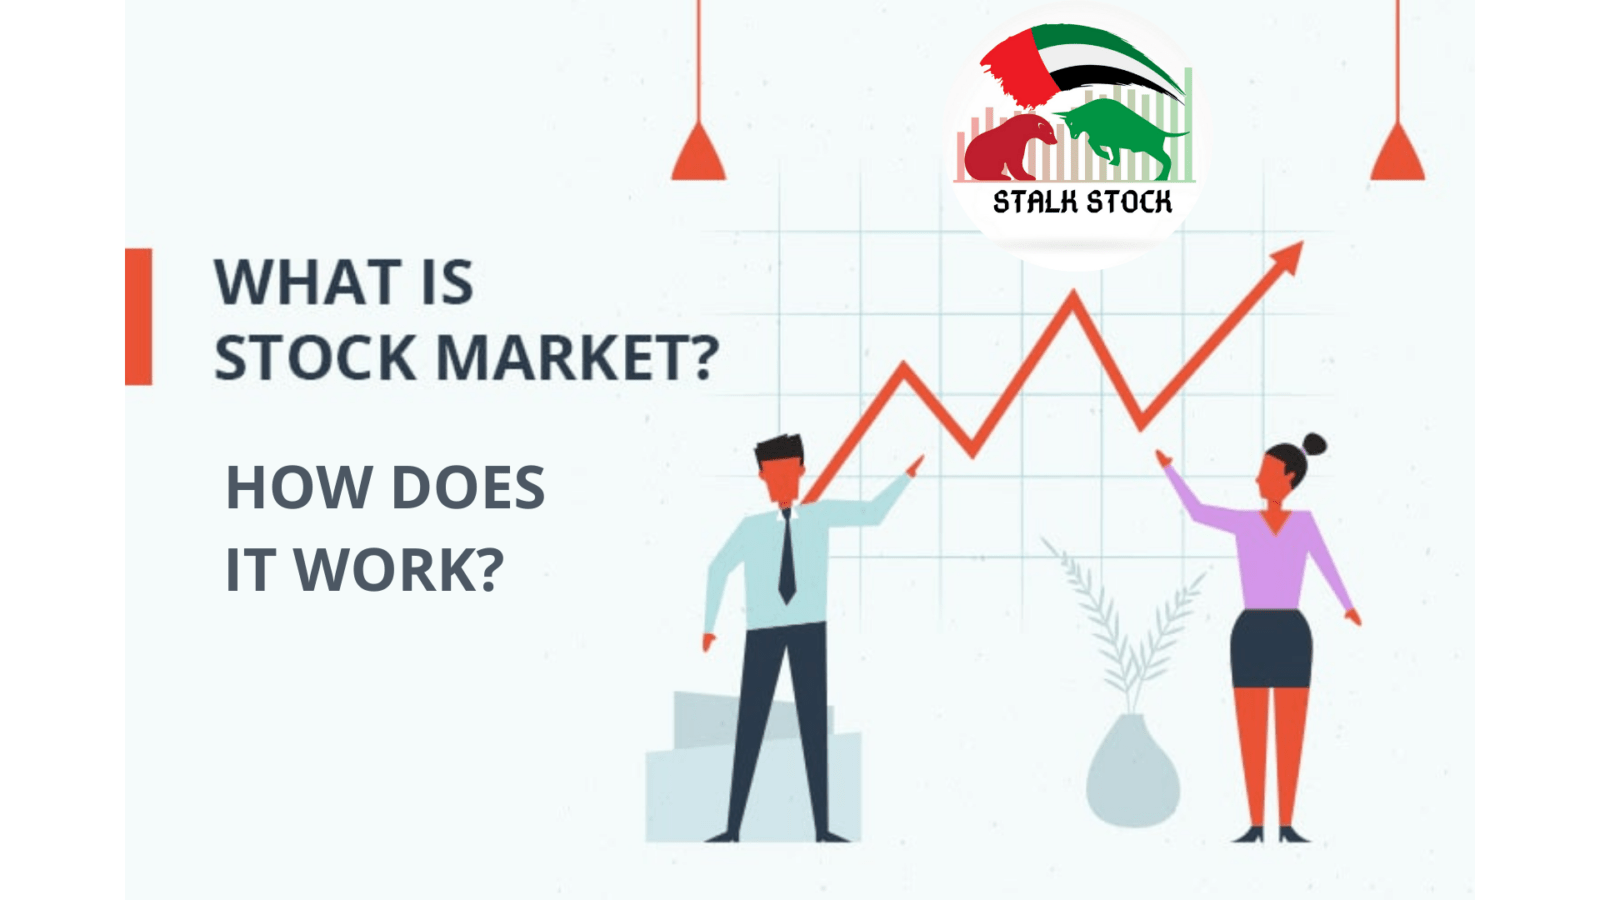 WHAT IS STOCK MARKET